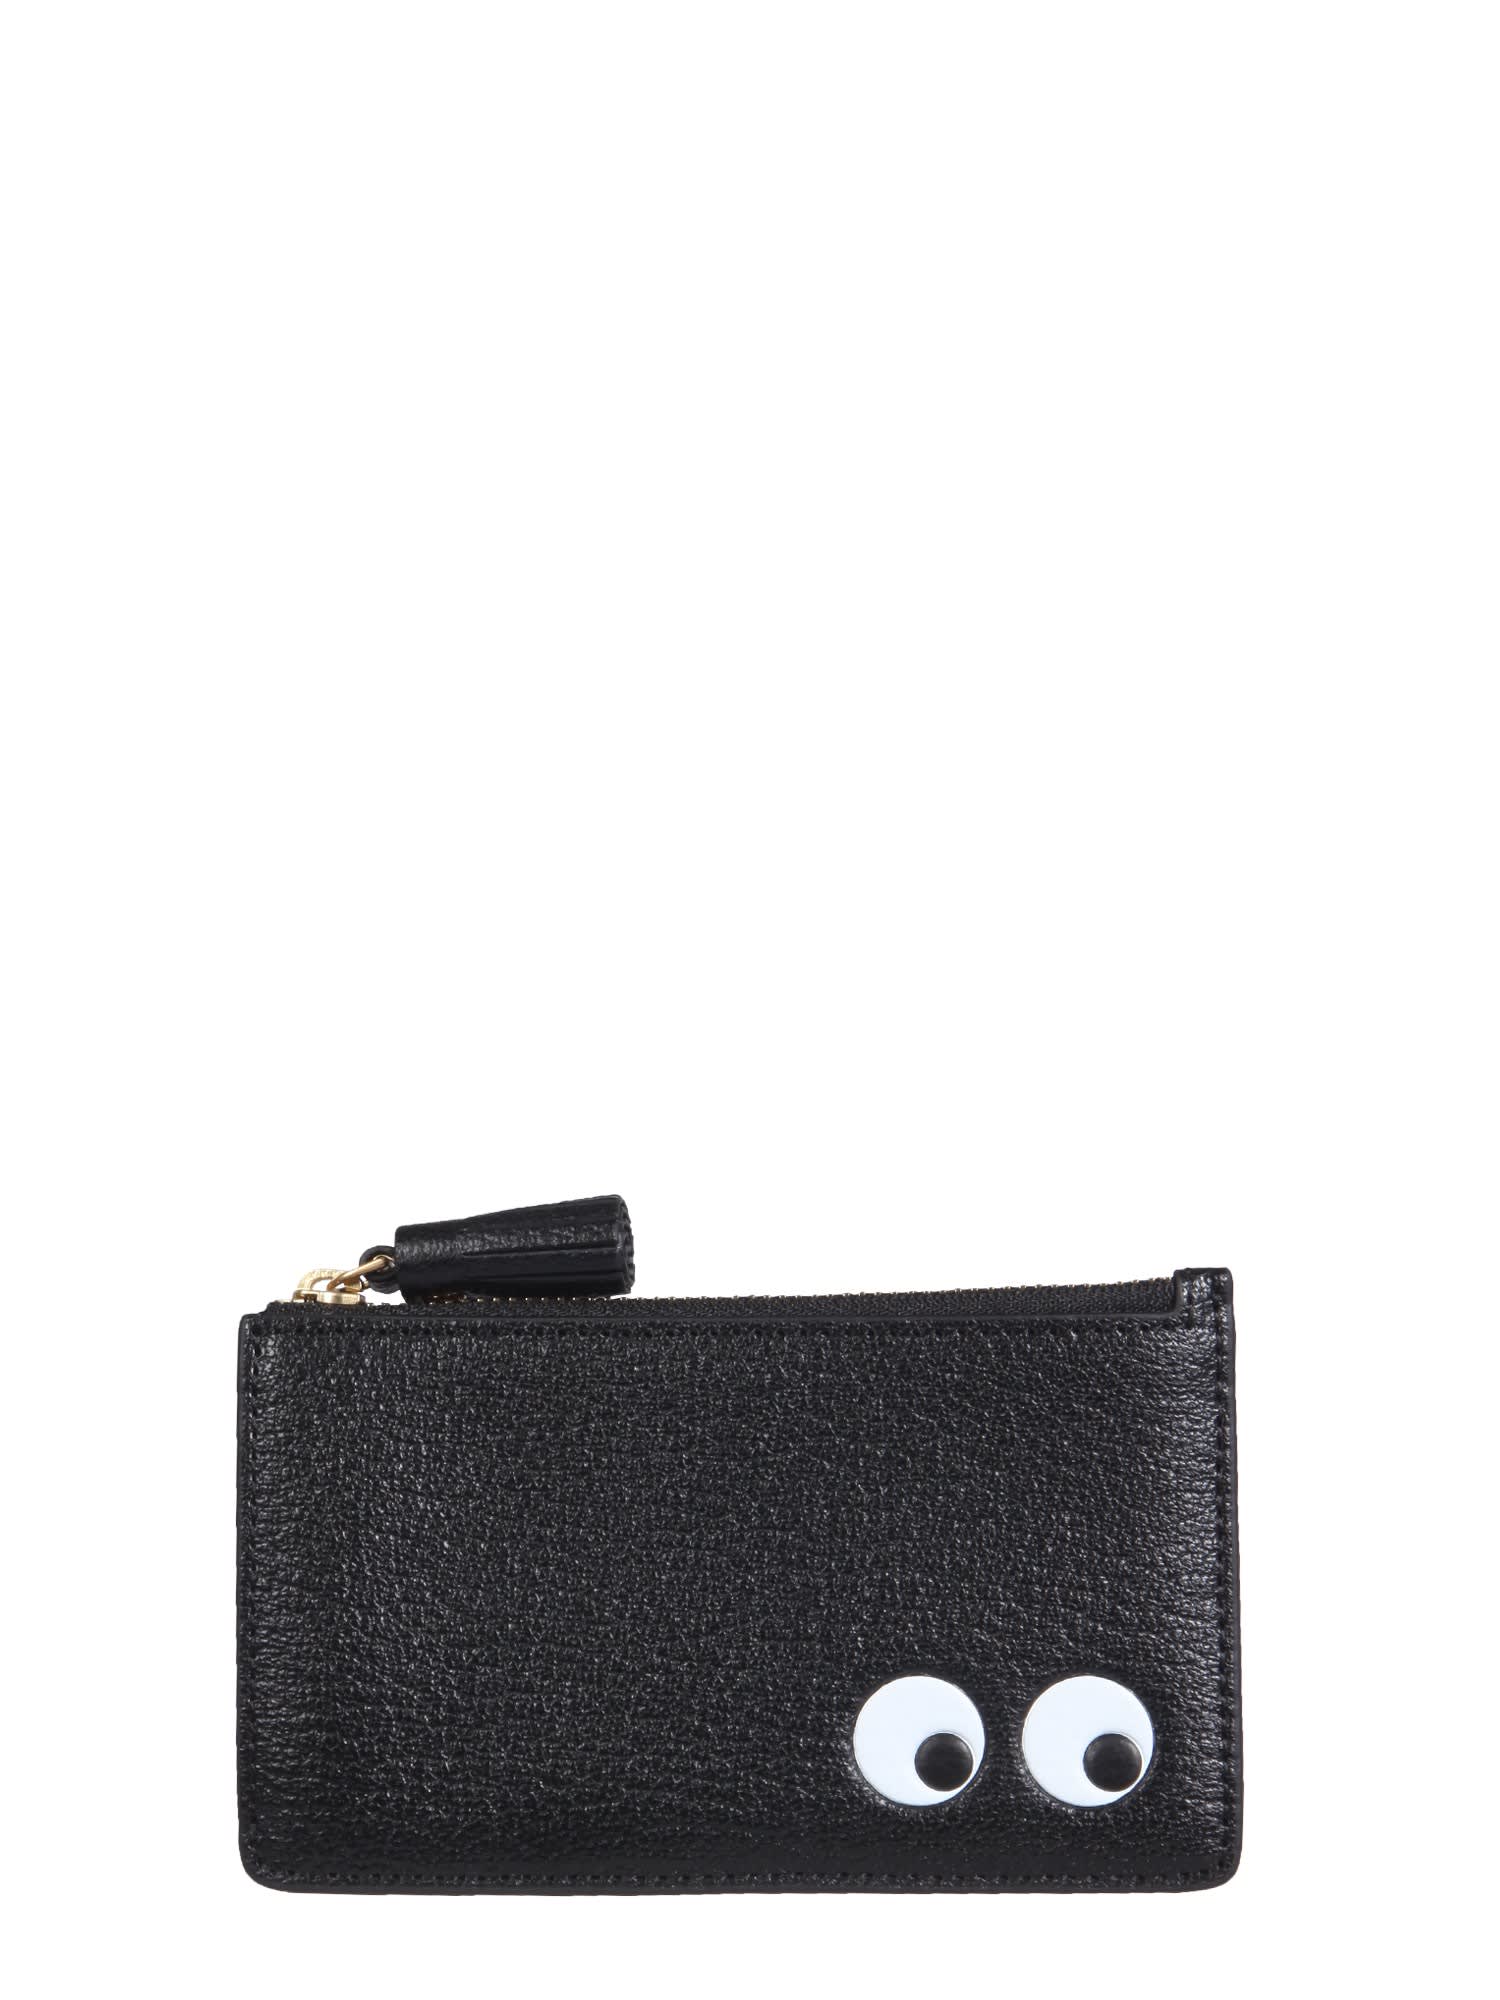 Anya Hindmarch Eyes Card Holder With Zip | italist, ALWAYS LIKE A SALE